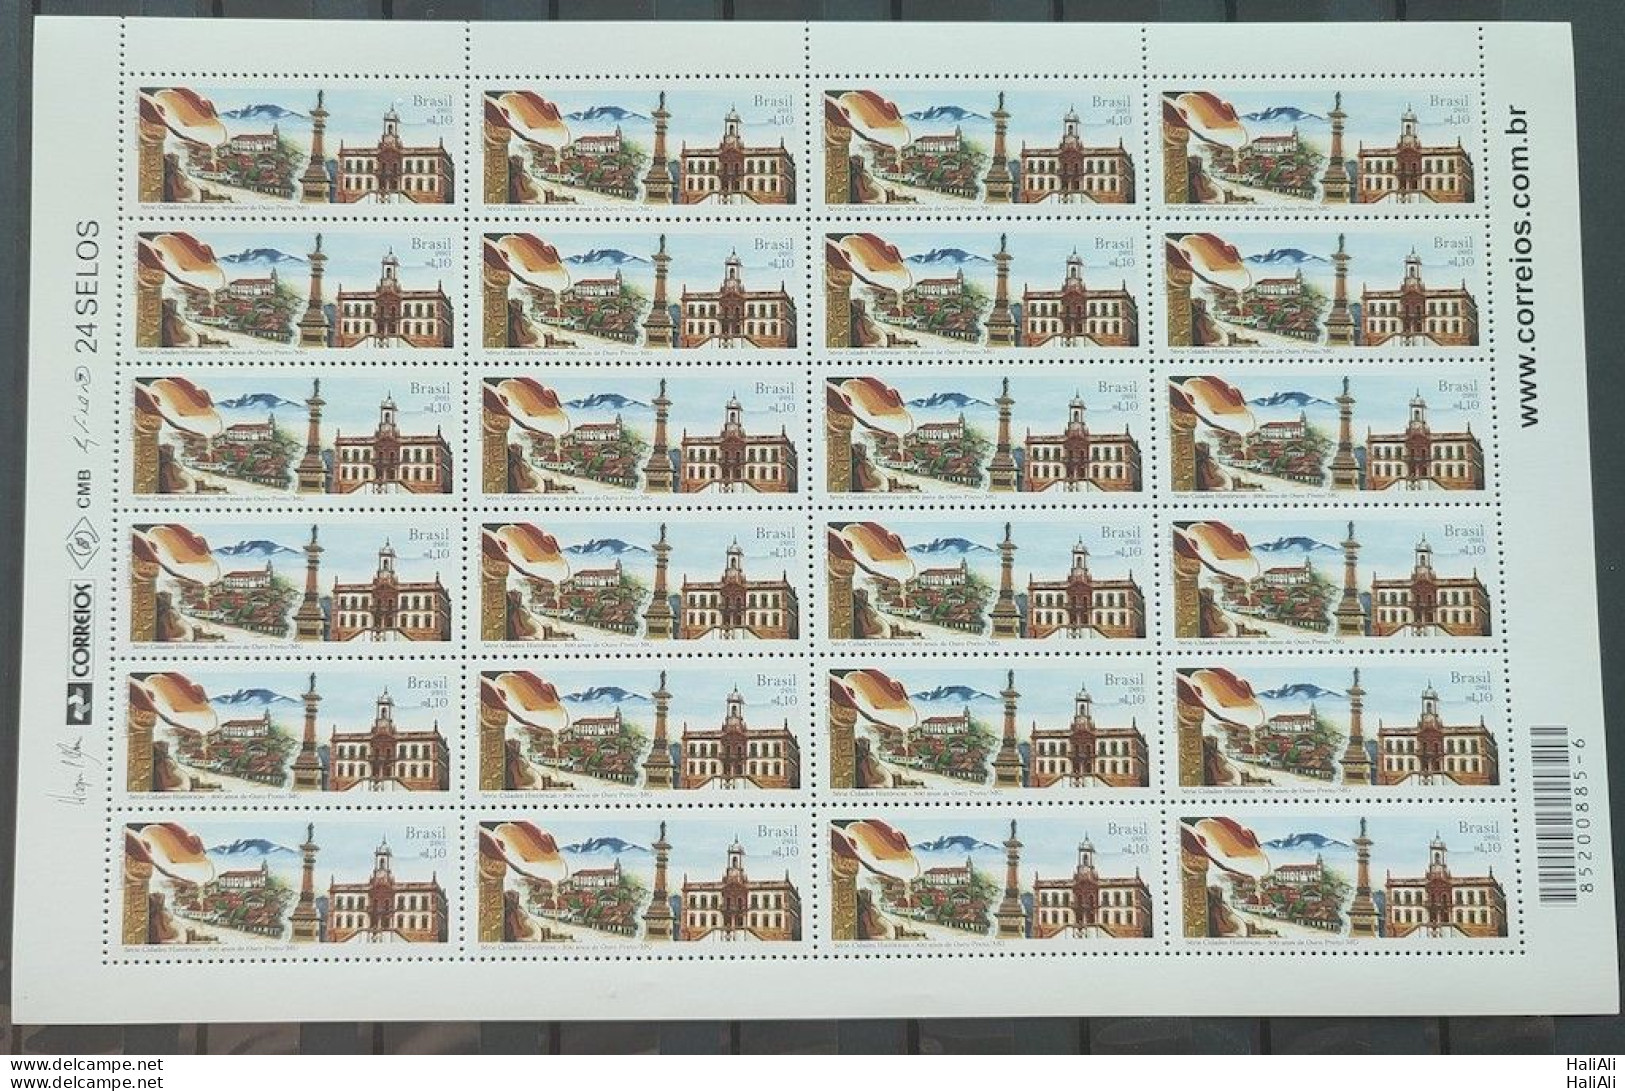 C 3097 Brazil Stamp Historical Cities Ouro Preto MG 2011 Sheet - Nuovi